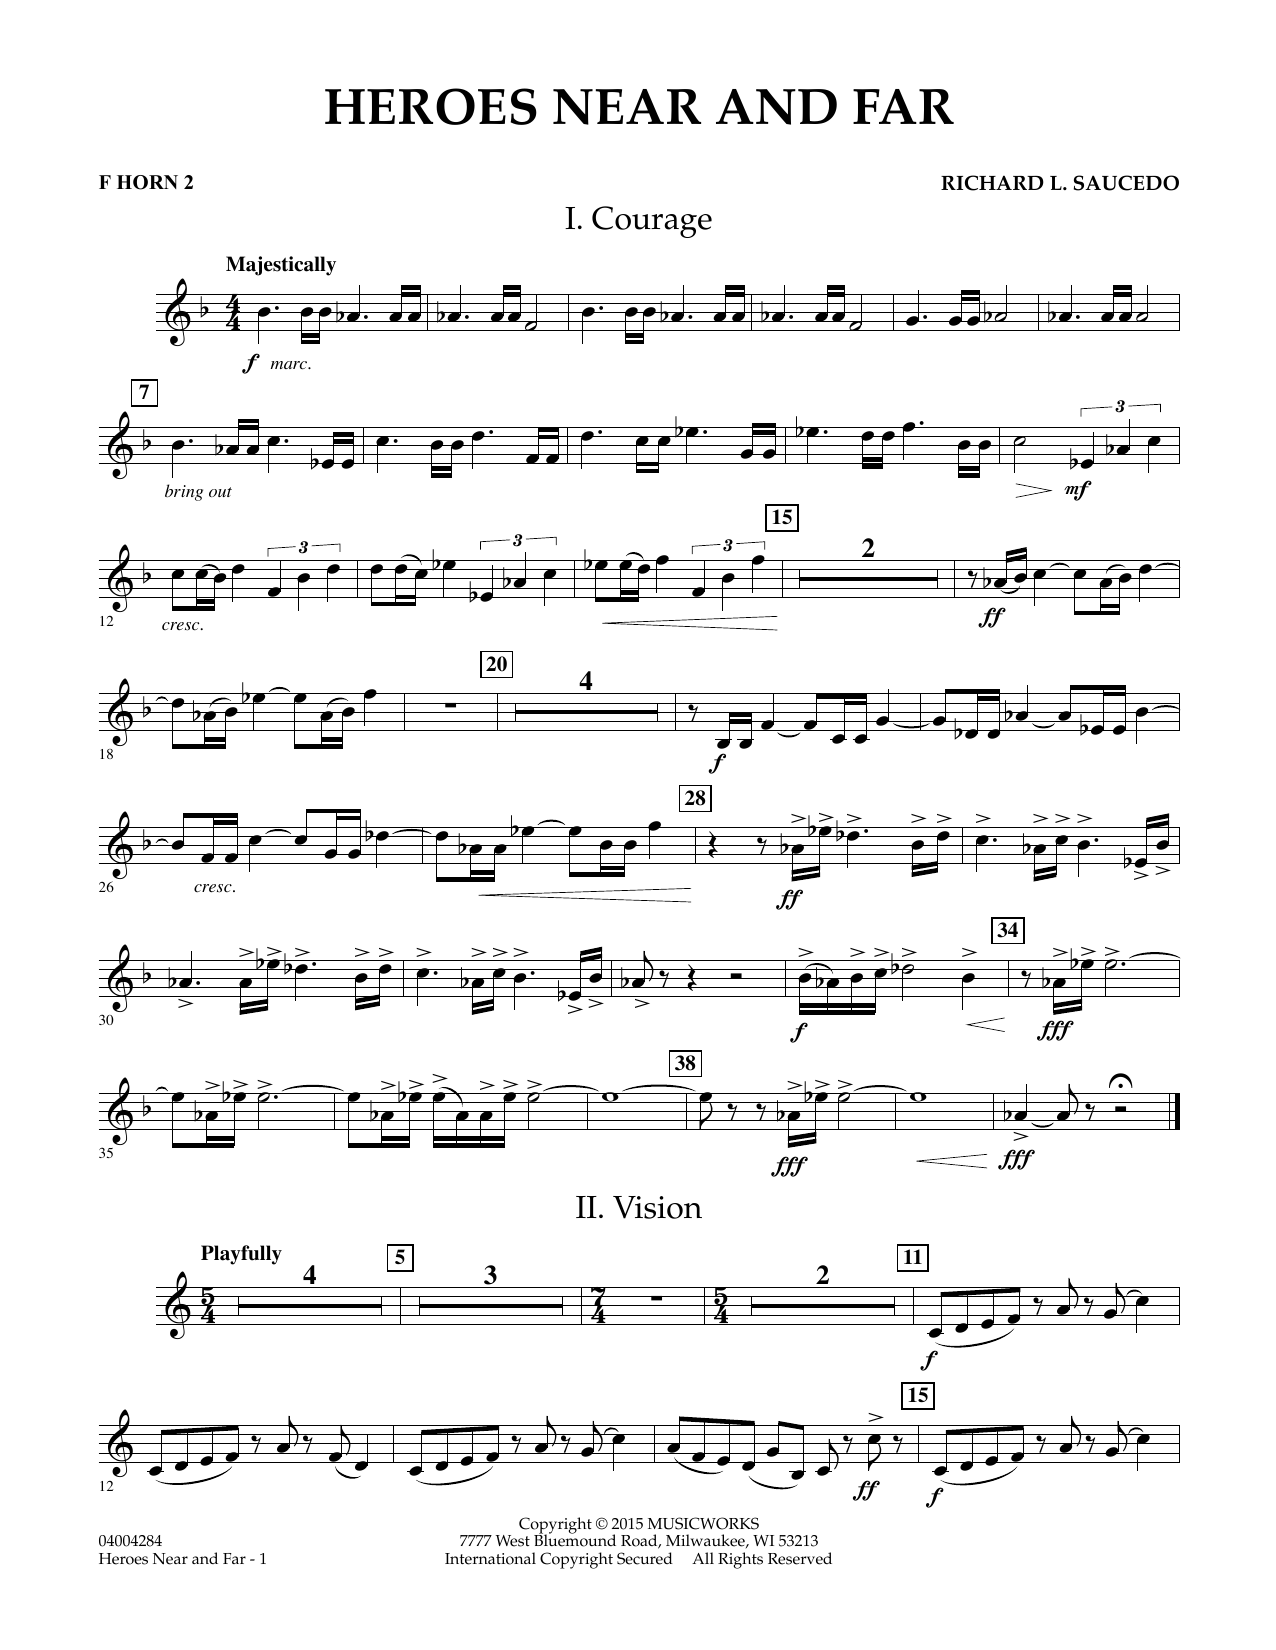 Richard L. Saucedo Heroes Near and Far - F Horn 2 sheet music notes and chords. Download Printable PDF.